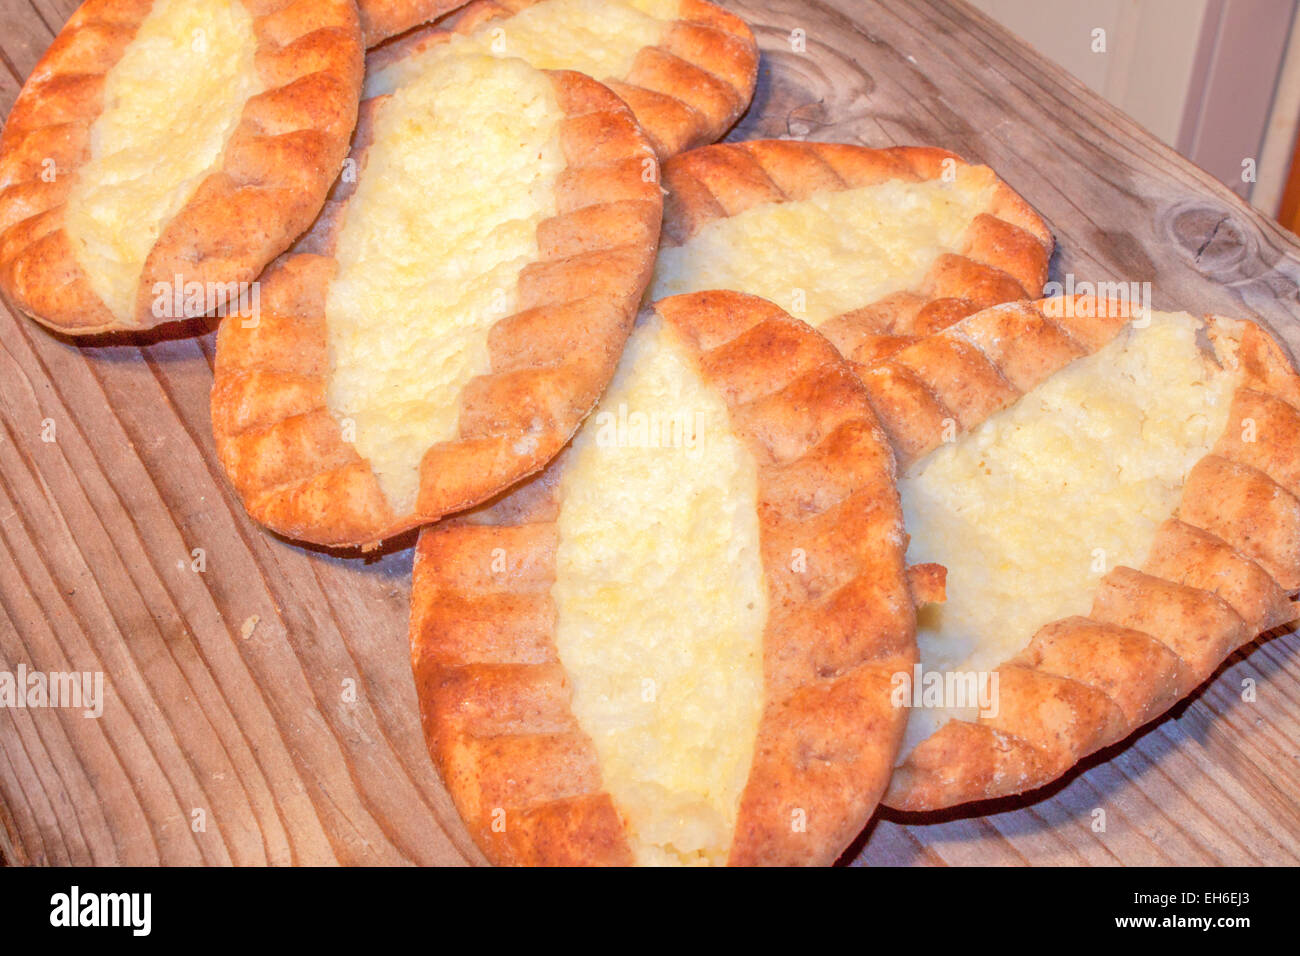 Few karelian pastry, on a wooden table Stock Photo